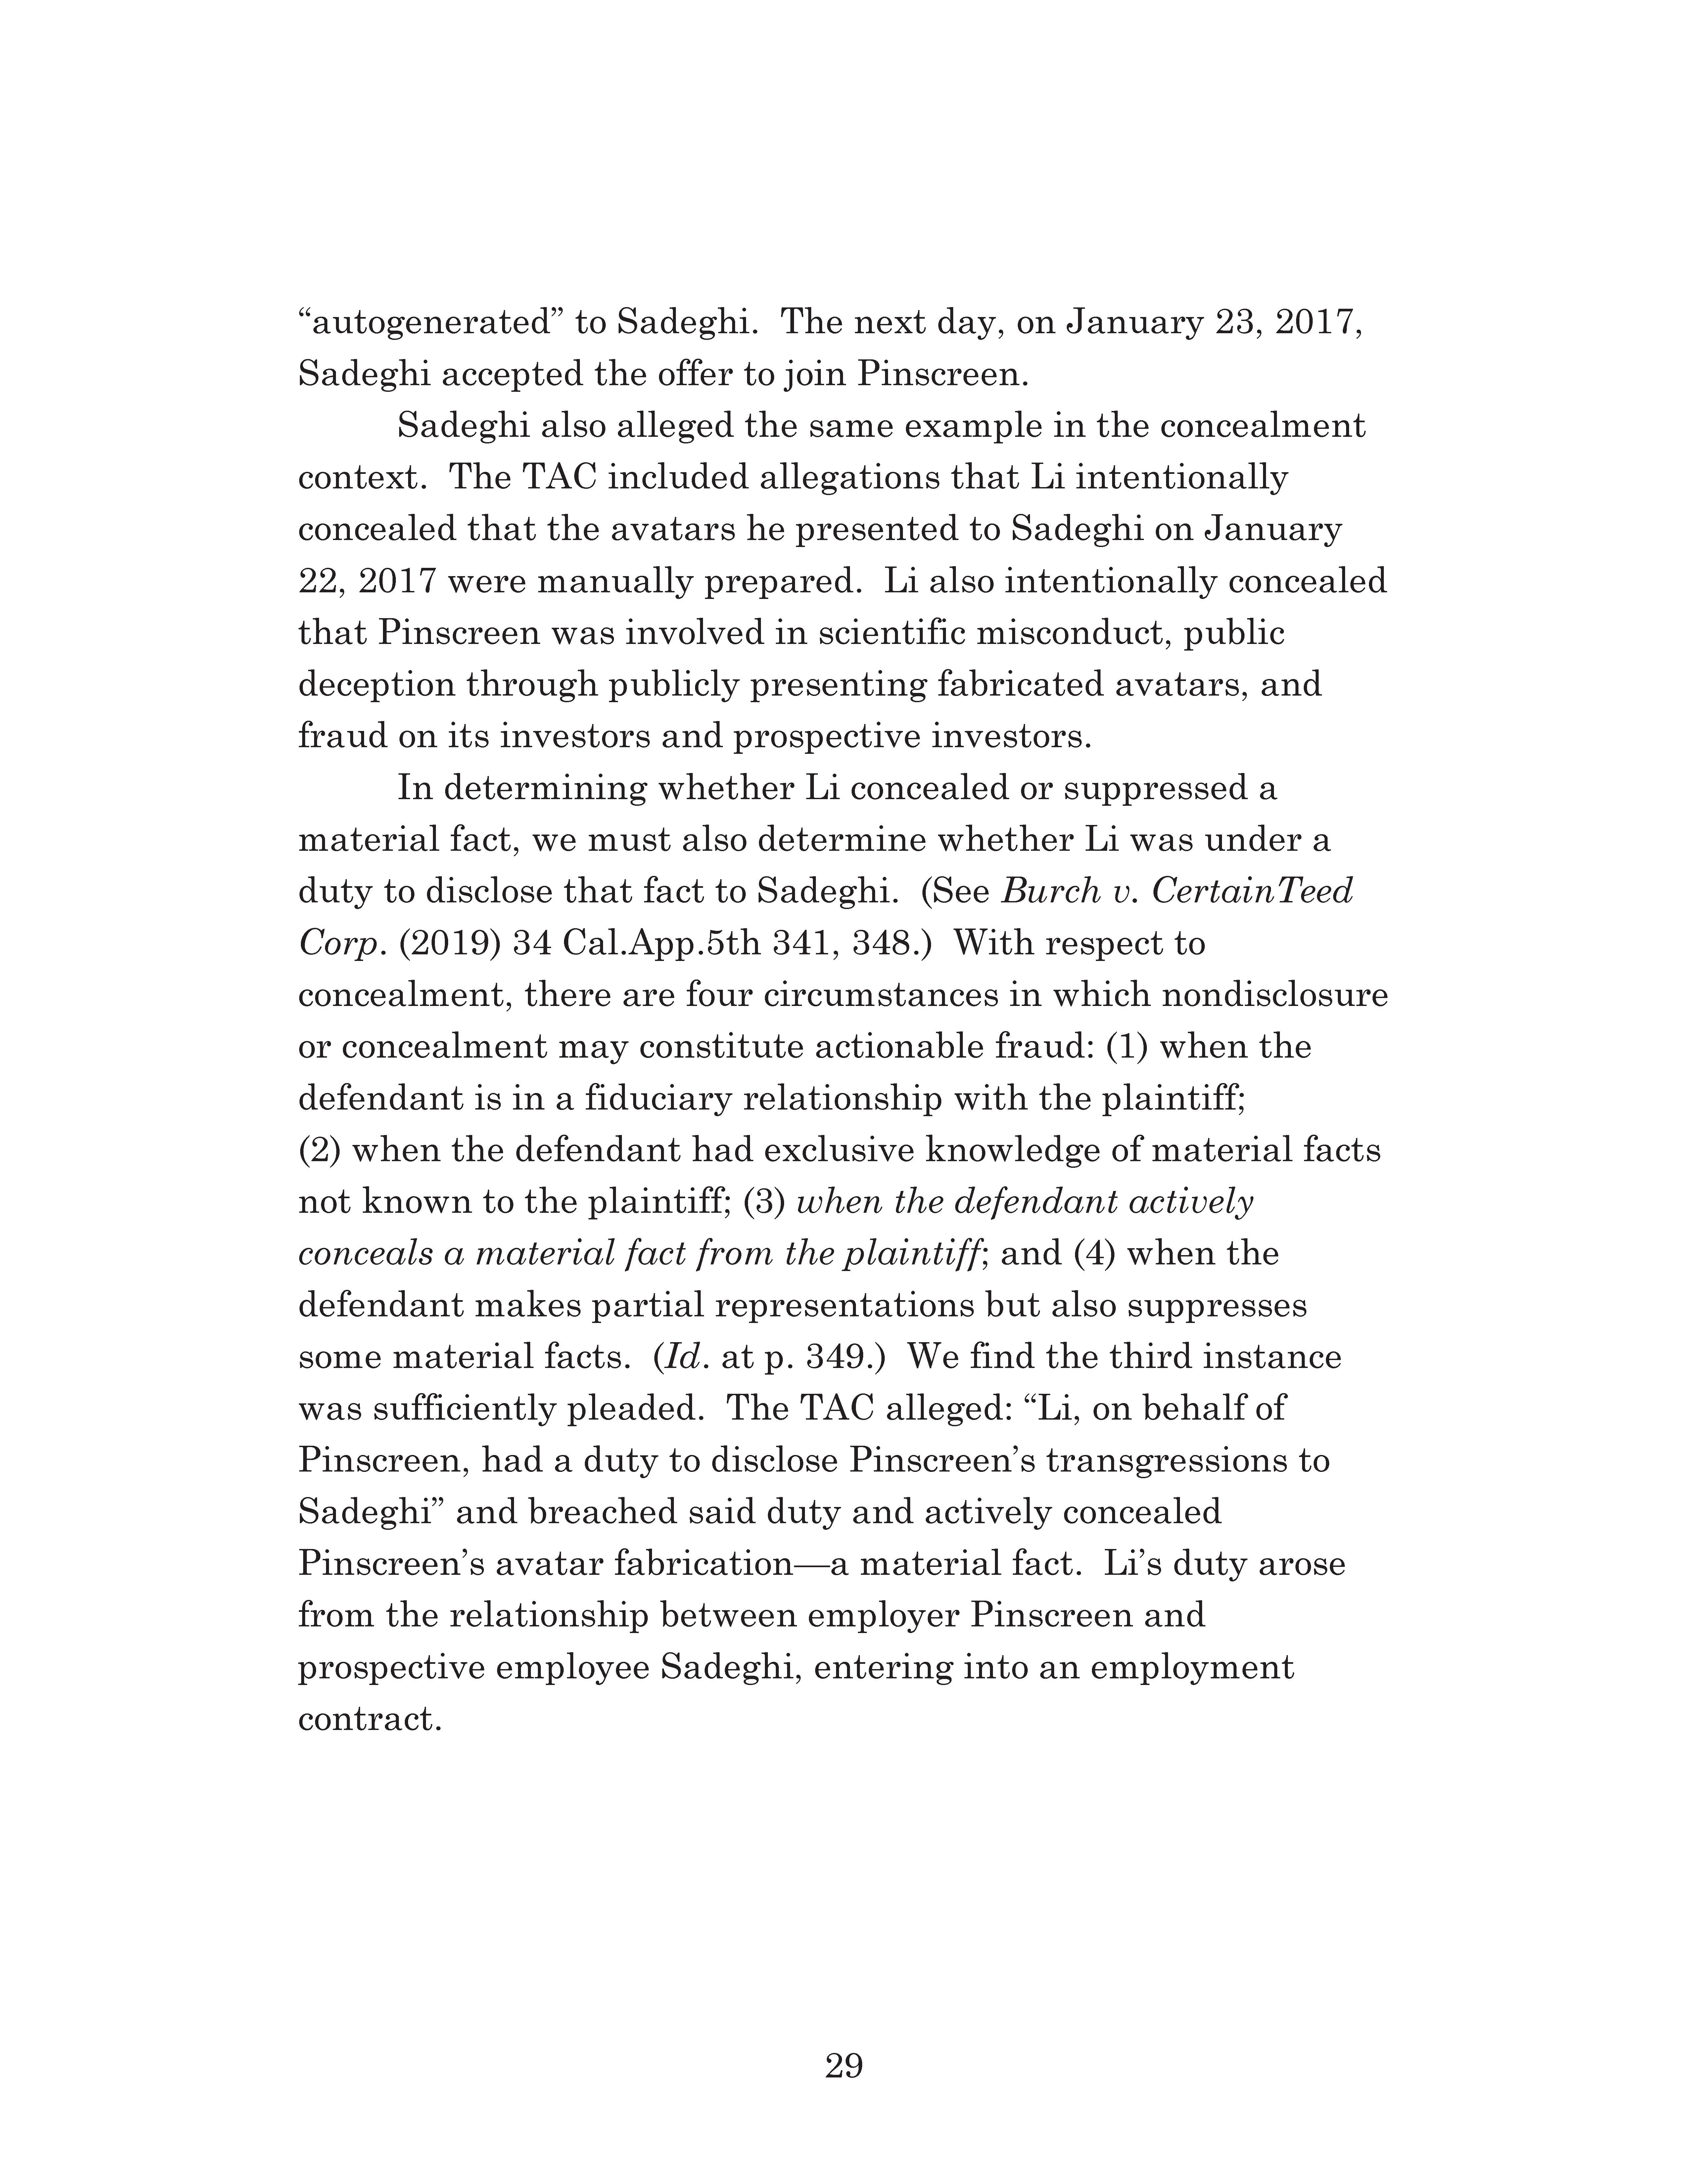 Appellate Court's Opinion Upholding Sadeghi's Claims for Fraud, Battery and IIED Against Li Page 29